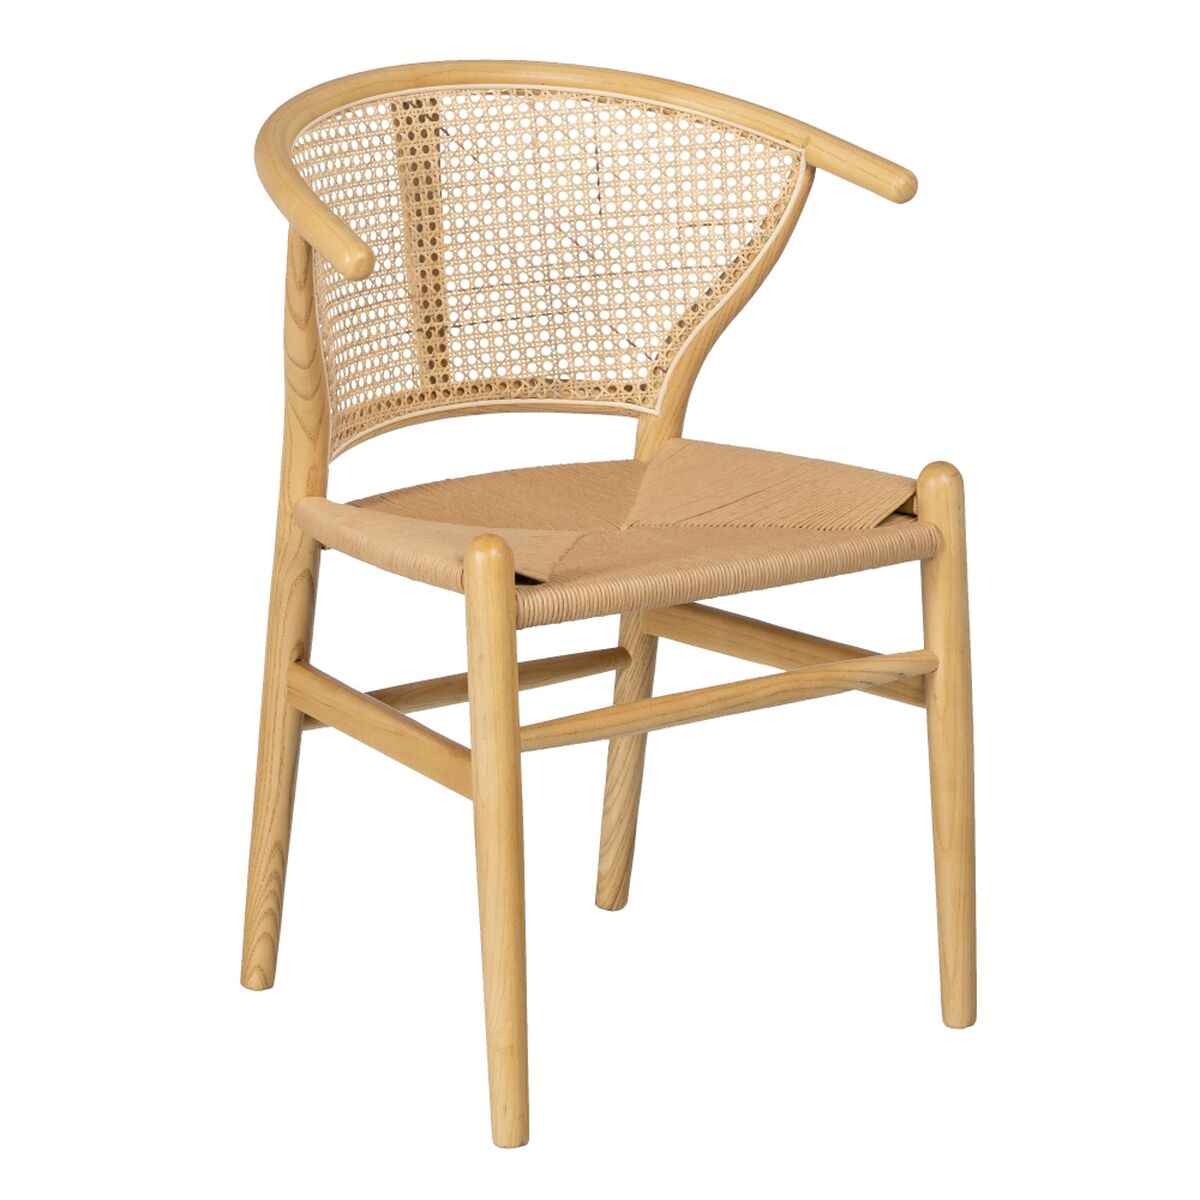 Dining Chair in Wood and Rattan (49 x 45 x 80 cm)